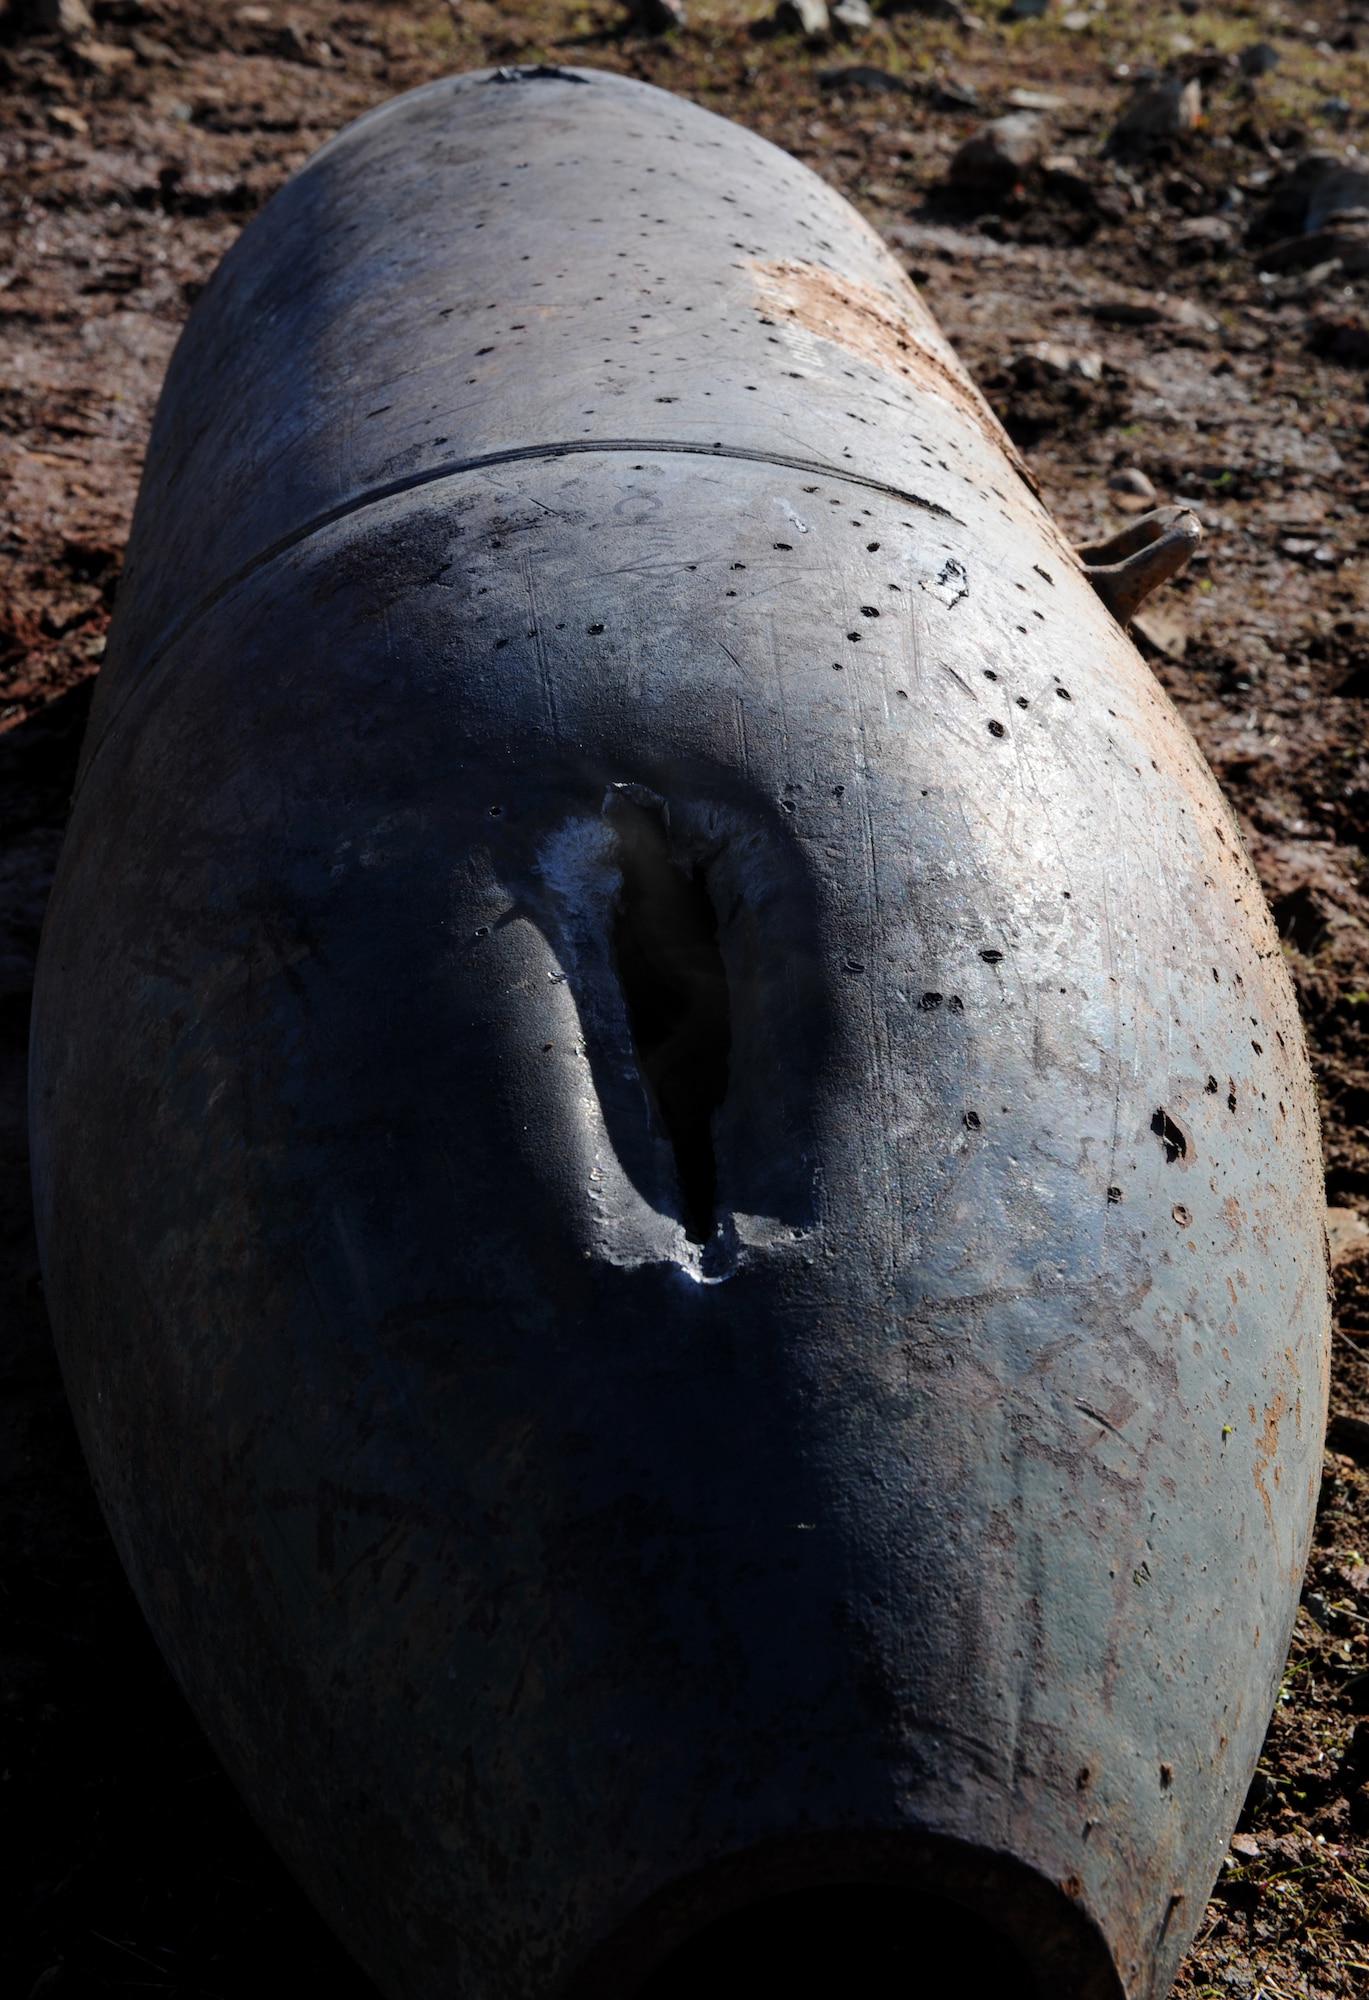 Inert ordnance is damaged by a shaped charge at the explosive ordinance disposal range on Beale Air Force Base, Calif., Dec. 19, 2012. EOD Airmen often train with different explosives to see the blasting effects. (U.S. Air Force photo by Staff Sgt. Robert M. Trujillo/Released)